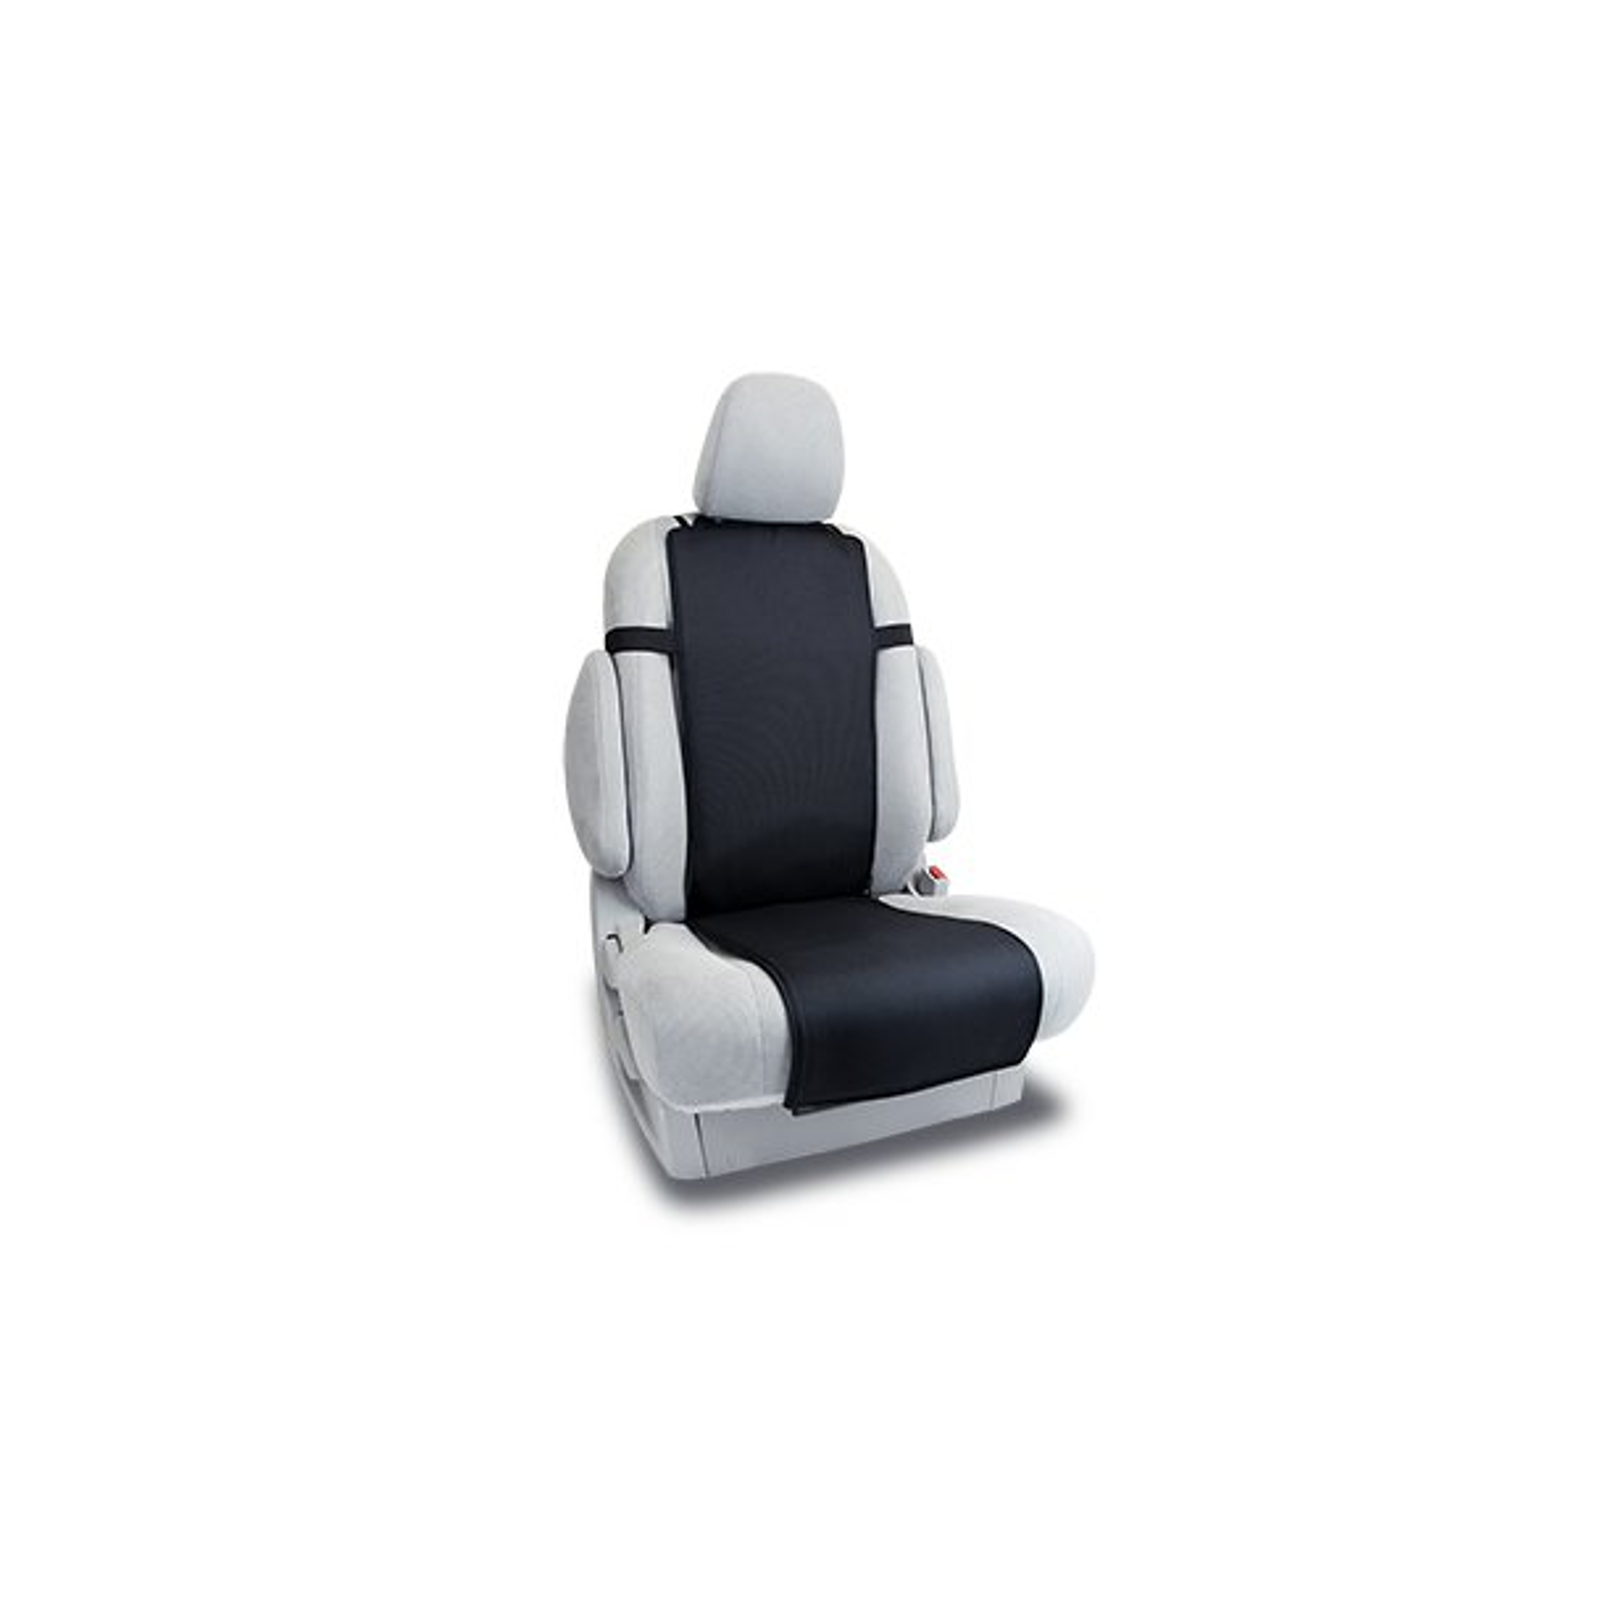 ProHeat Seat Cover - Heated Seat Cover